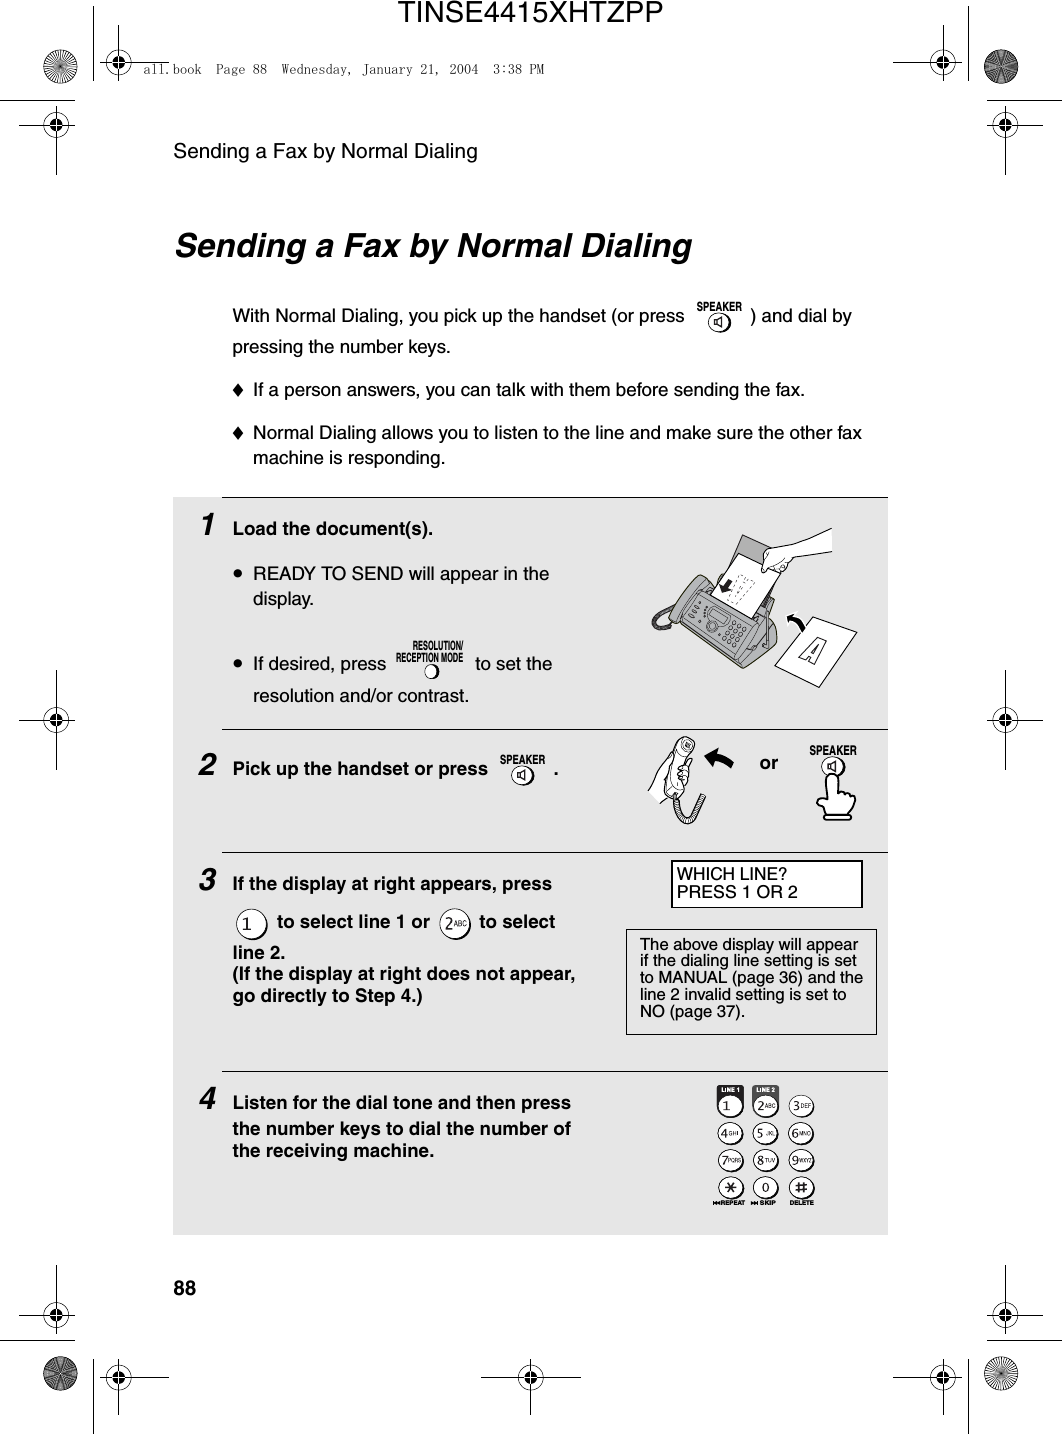 Sending a Fax by Normal Dialing881Load the document(s).•READY TO SEND will appear in the display.•If desired, press   to set the resolution and/or contrast.2Pick up the handset or press  . 3If the display at right appears, press  to select line 1 or   to select line 2.(If the display at right does not appear, go directly to Step 4.)4Listen for the dial tone and then press the number keys to dial the number of the receiving machine.RESOLUTION/RECEPTION MODESPEAKERorSending a Fax by Normal DialingWith Normal Dialing, you pick up the handset (or press  ) and dial by pressing the number keys. ♦If a person answers, you can talk with them before sending the fax.♦Normal Dialing allows you to listen to the line and make sure the other fax machine is responding.SPEAKERDELETEREPEATSKIPSPEAKERWHICH LINE?PRESS 1 OR 2The above display will appear if the dialing line setting is set to MANUAL (page 36) and the line 2 invalid setting is set to NO (page 37).all.book  Page 88  Wednesday, January 21, 2004  3:38 PMTINSE4415XHTZPP